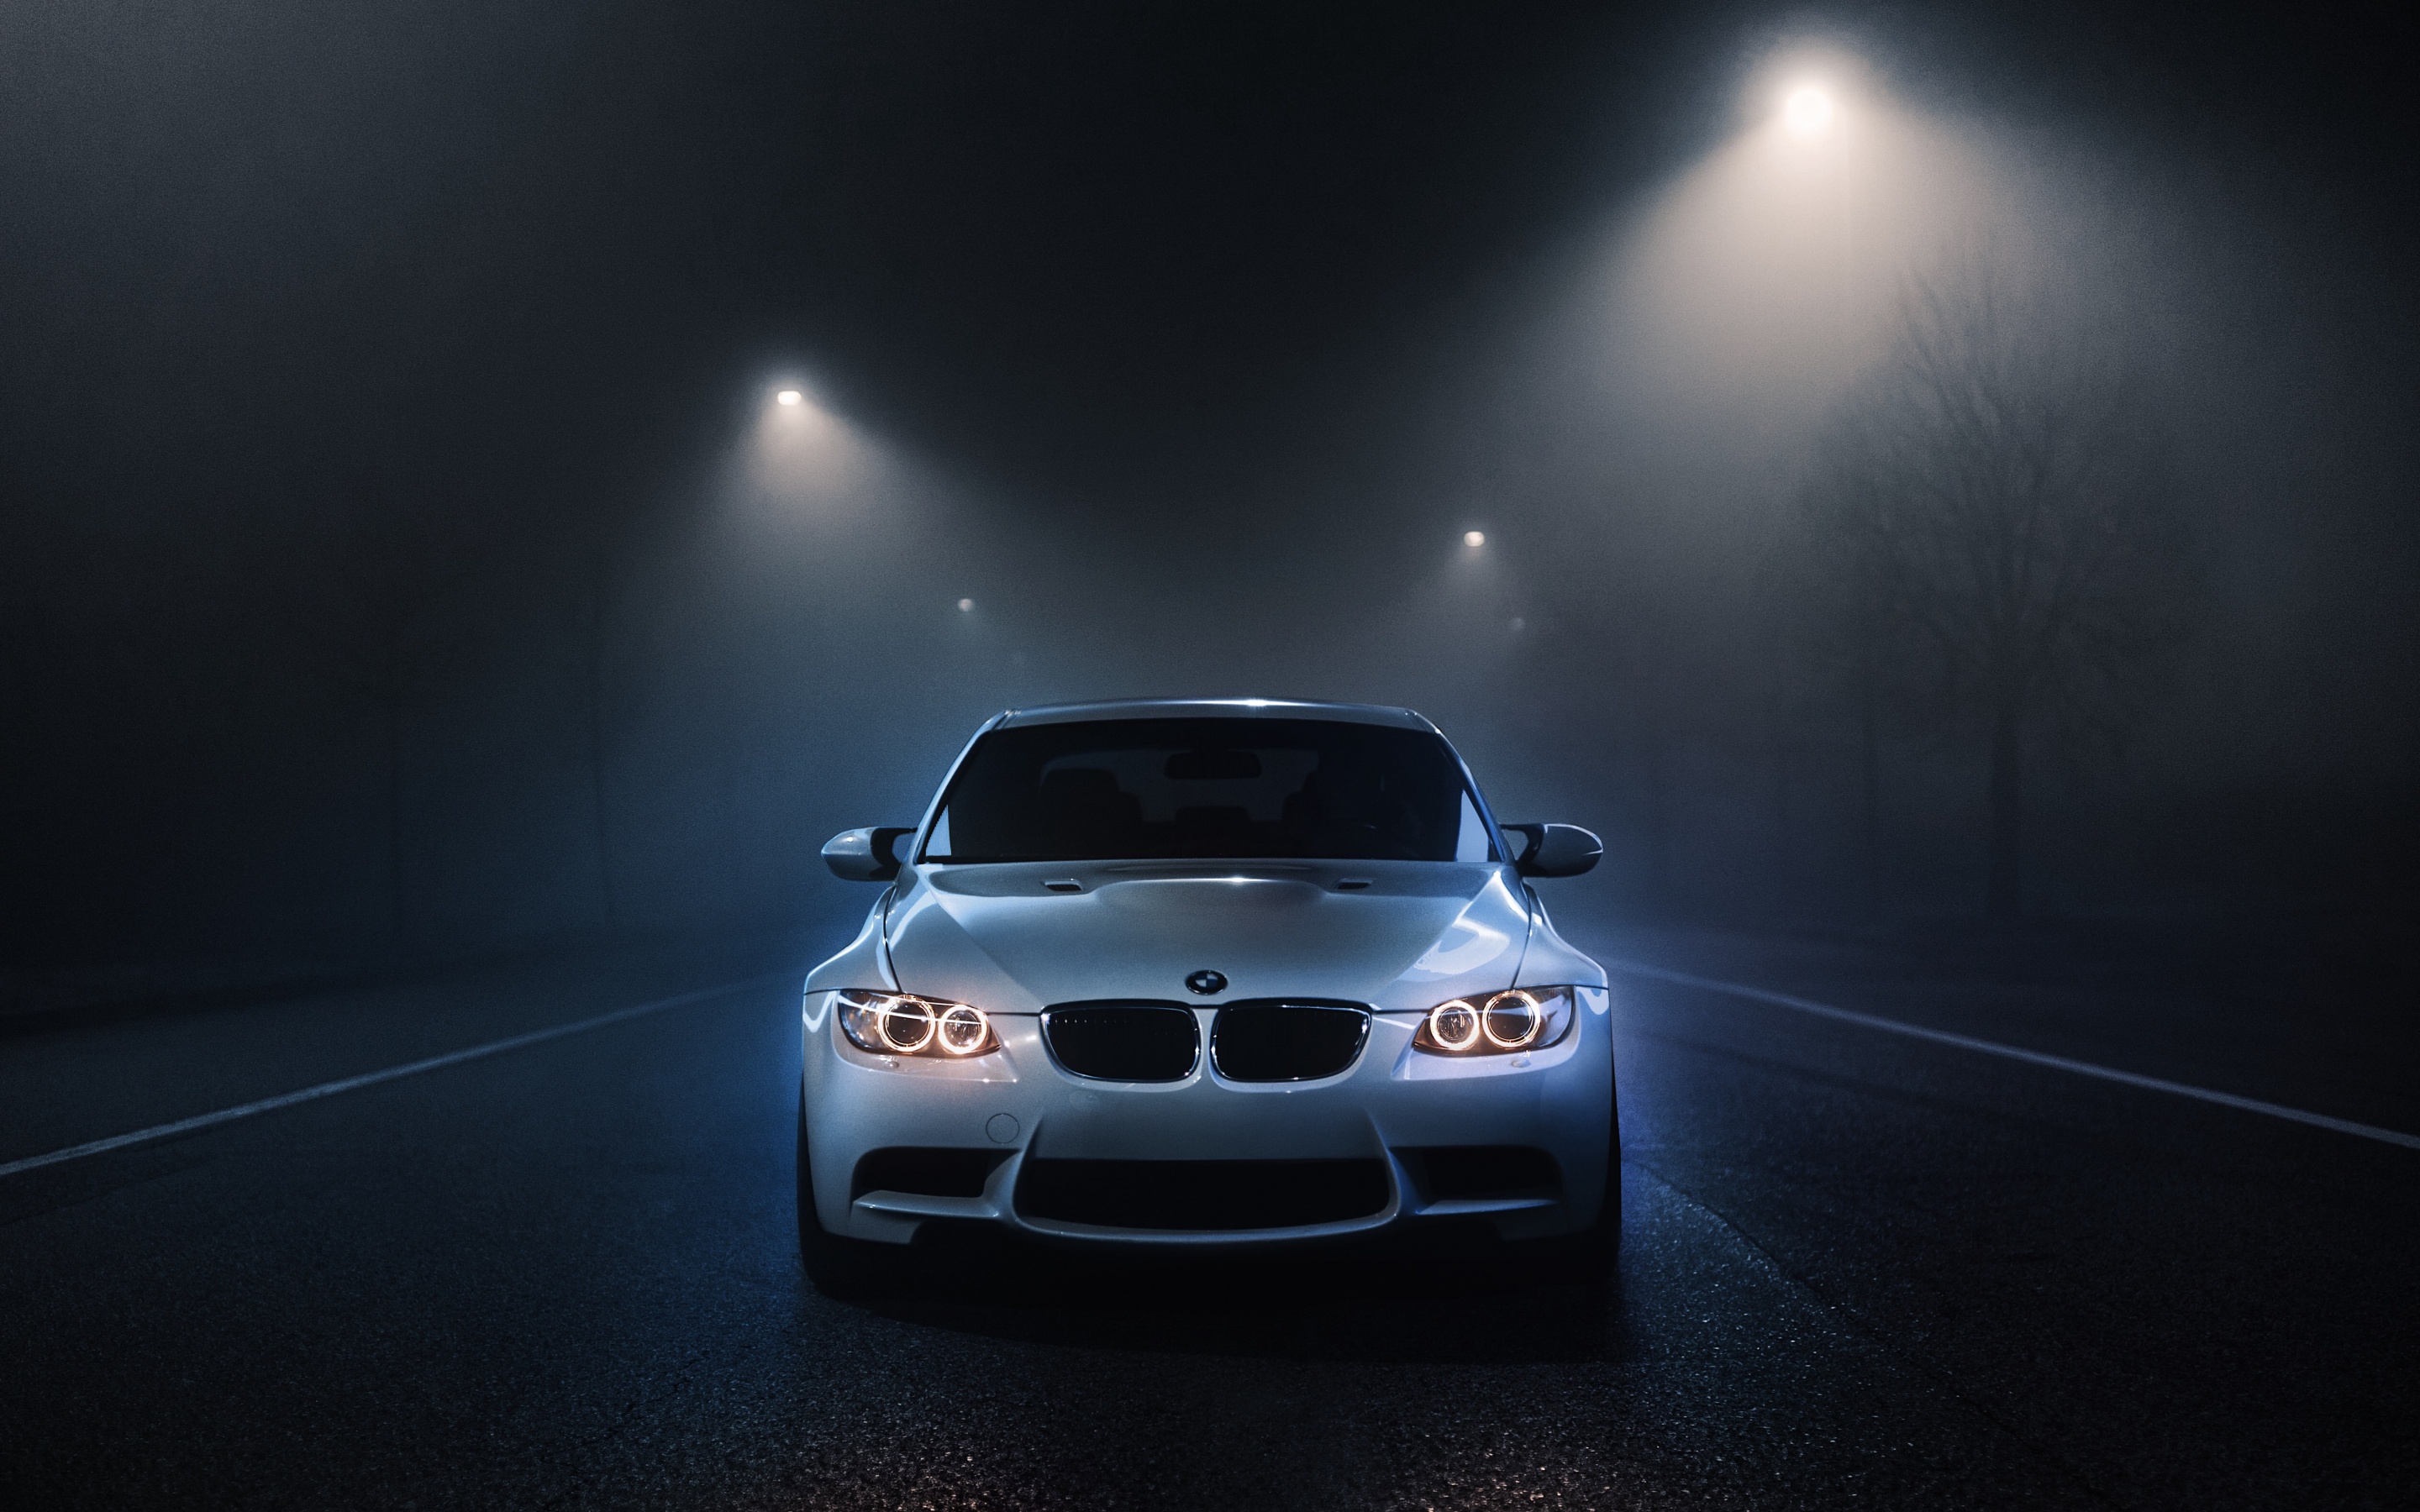 Bmw Night Wallpapers Wallpaper Cave